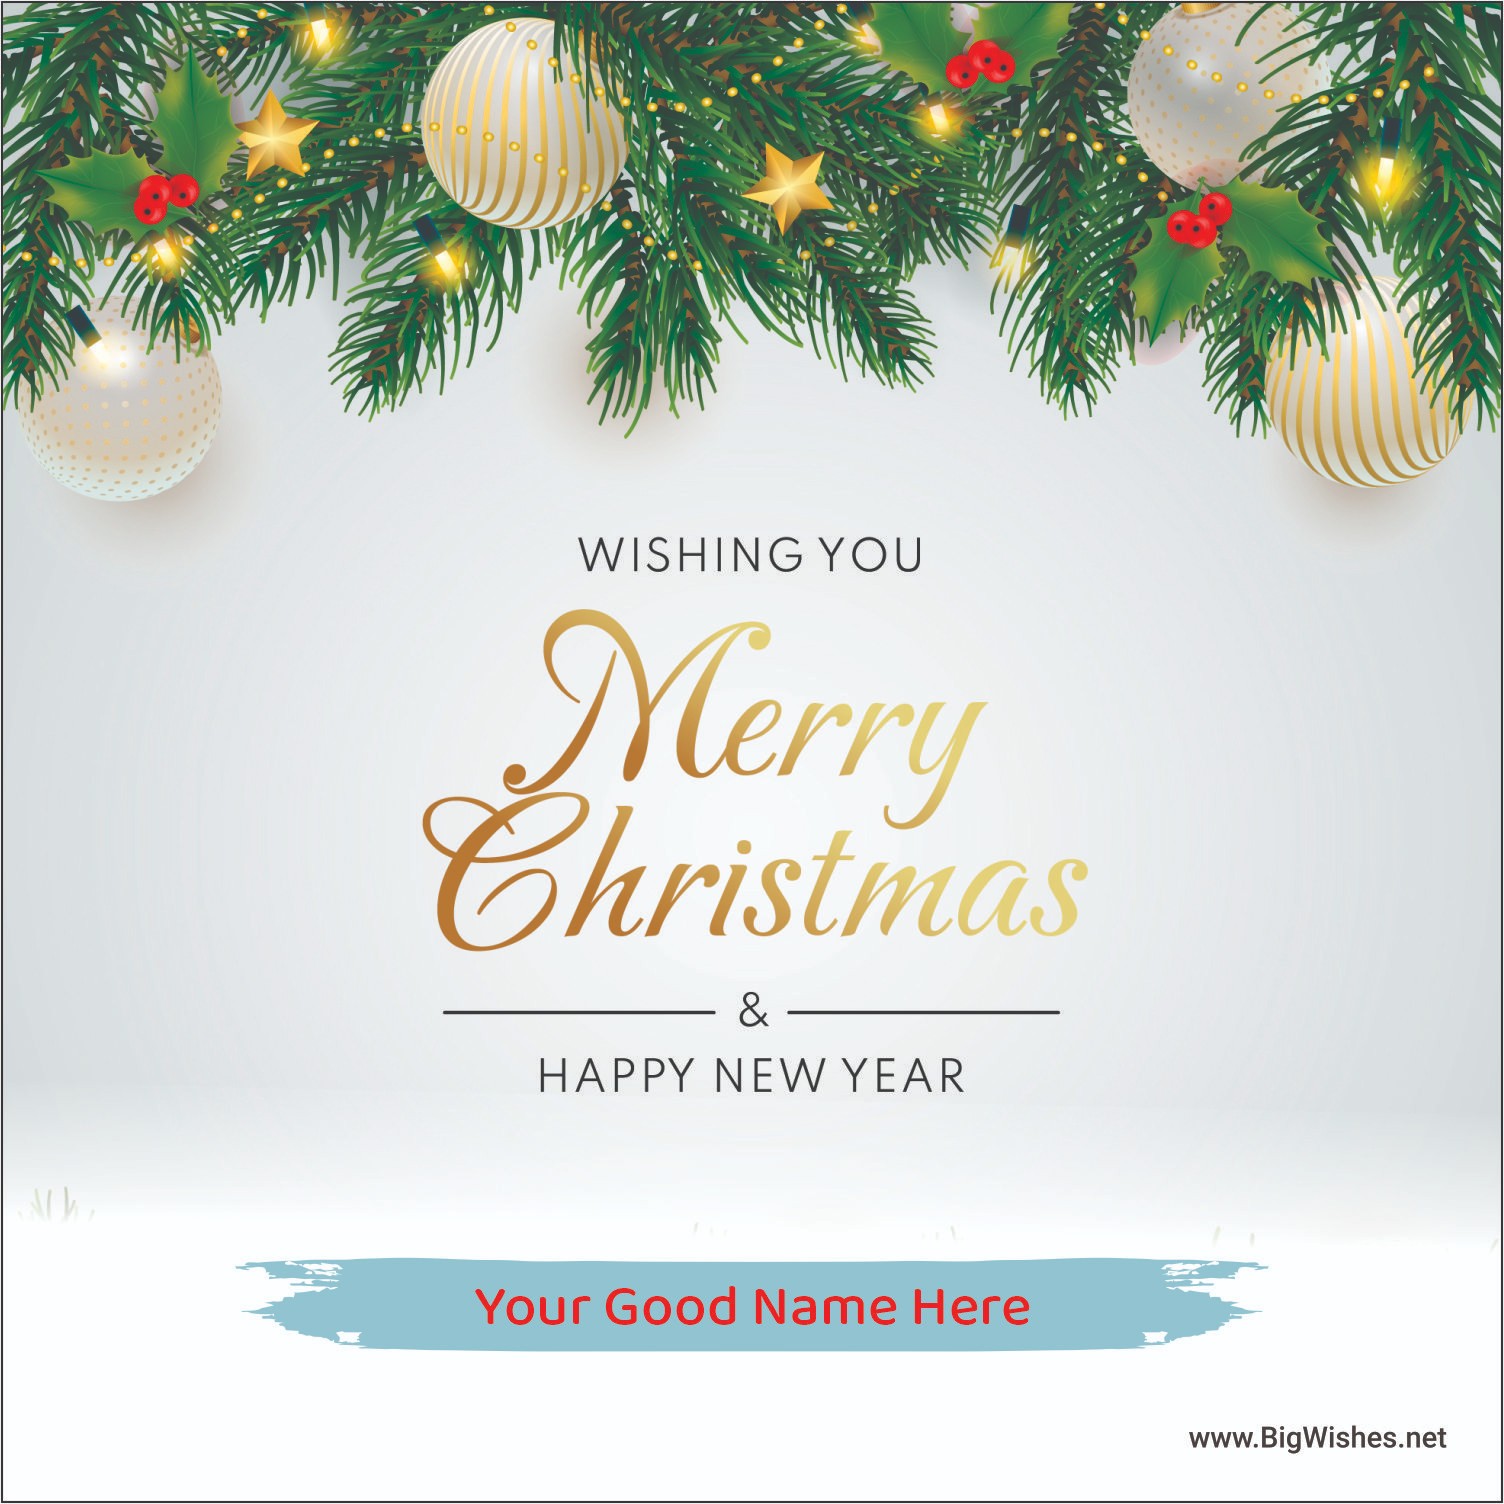 Merry Christmas 2022 & Happy New Year 2023 Wishes Card for Best Friend